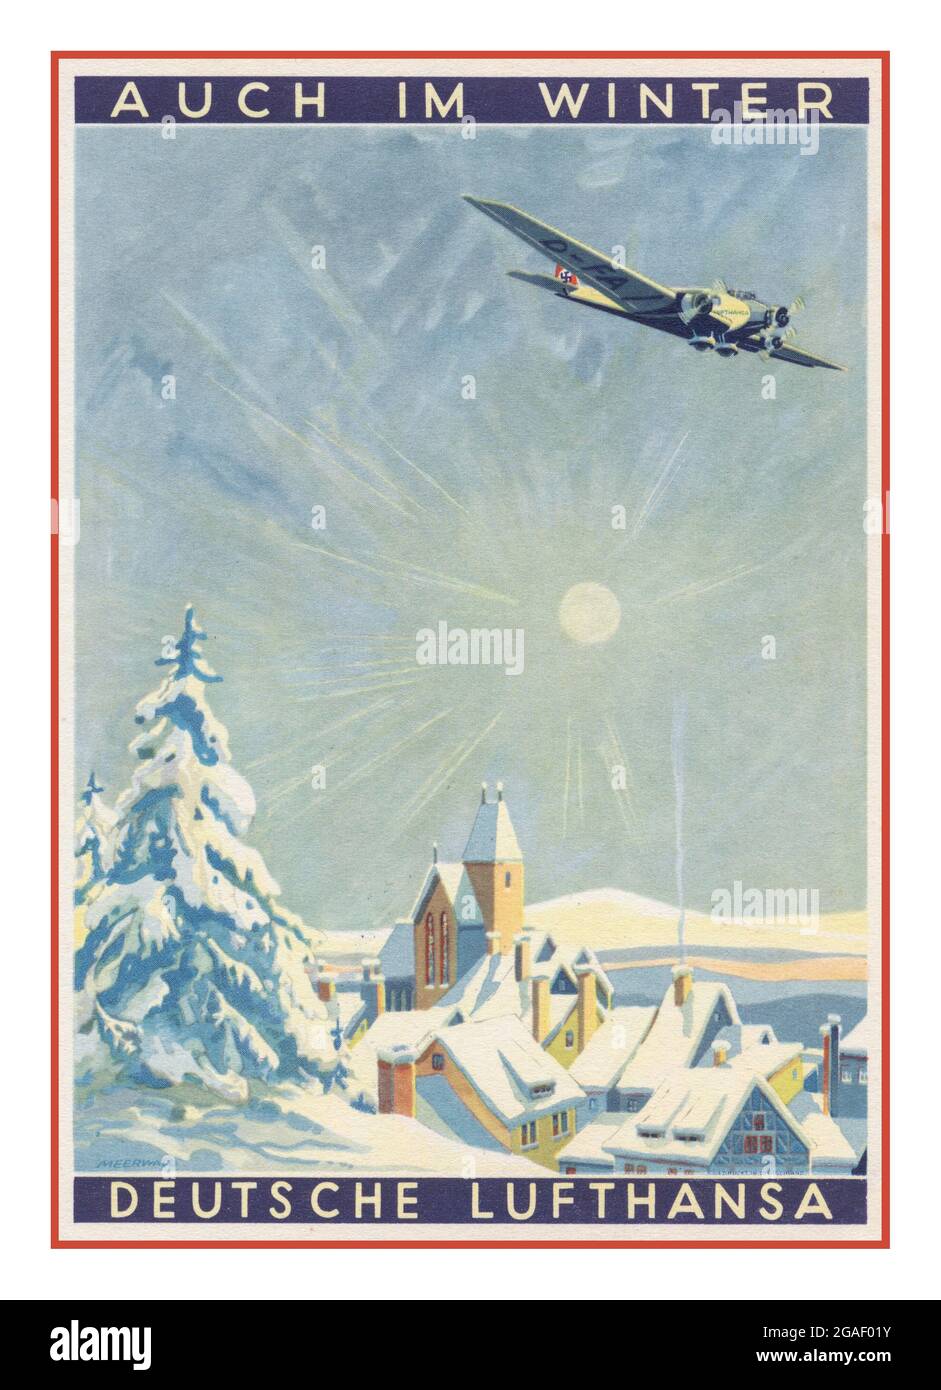 1936, 'Also in winter DEUTSCHE LUFTHANSA', large-format colored advertising card of the Deutsche Lufthansa AG with a picture of a Lufthansa airplane with a swastika over a snow-covered town, Meerwald, Kandel July 25th, 1936  'AUCH IM WINTER. DEUTSCHE LUFTHANSA' Stock Photo